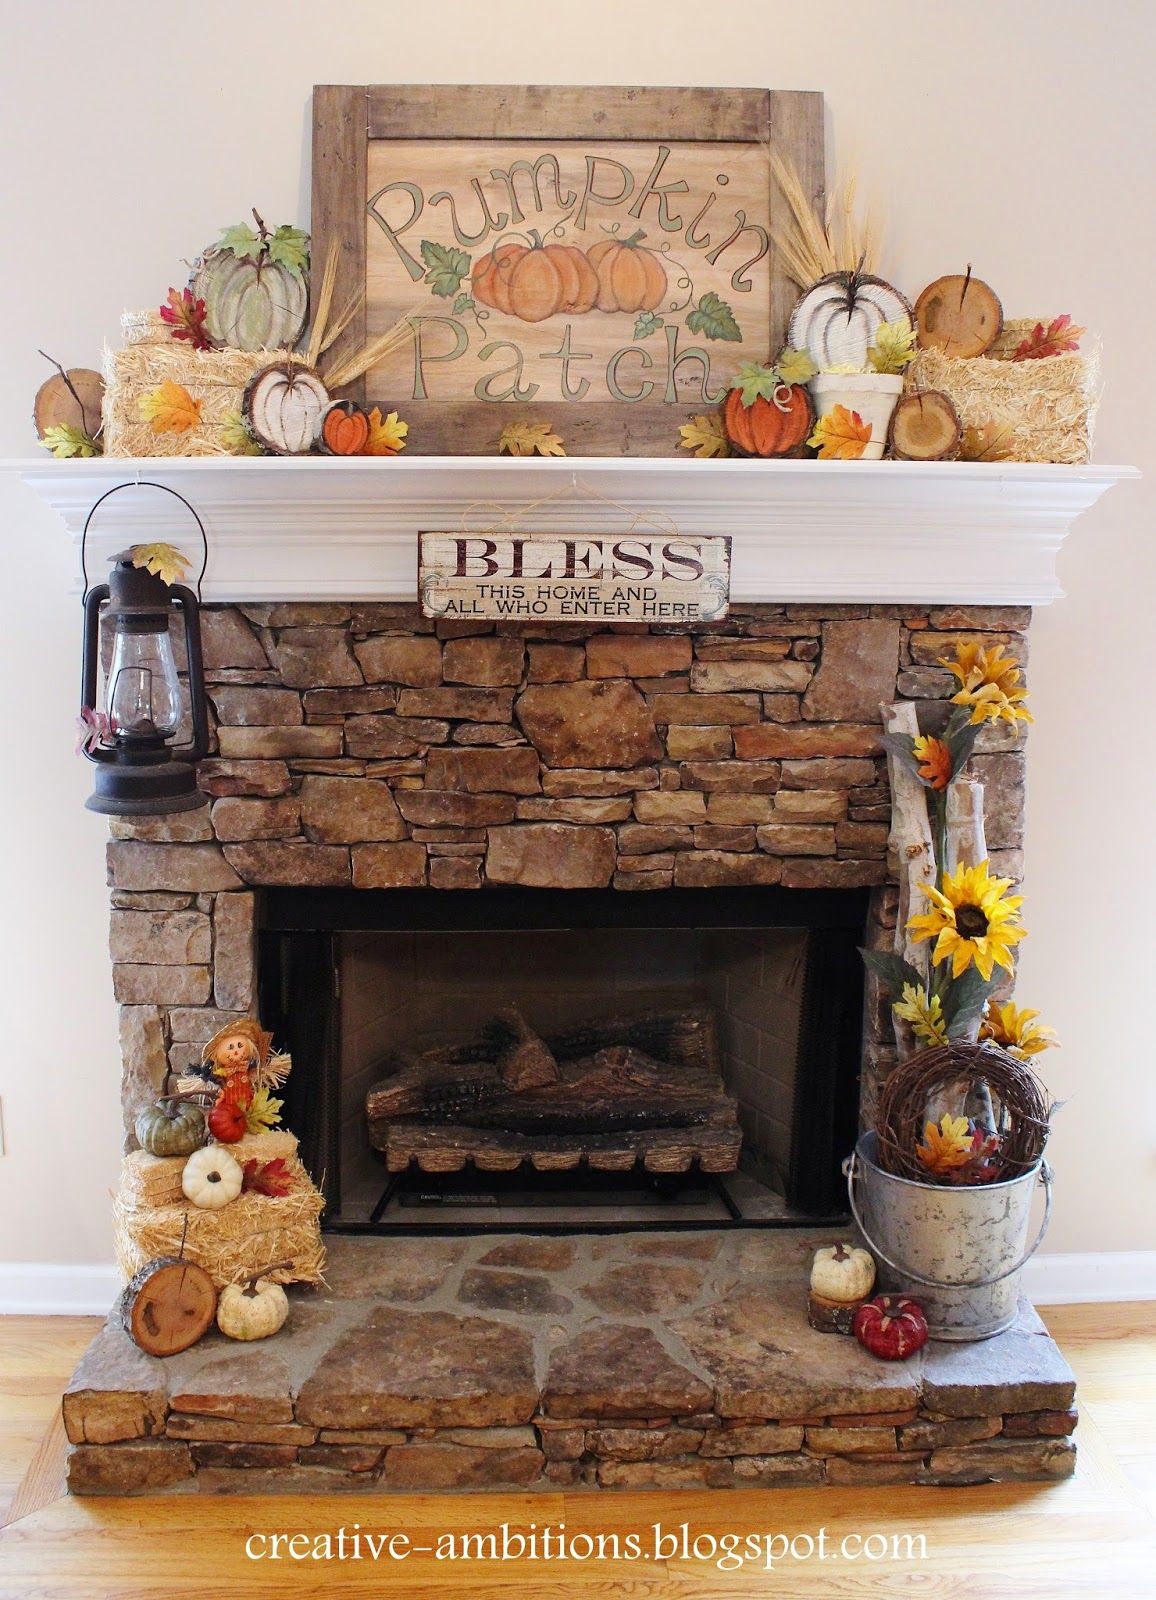 Fireplace Smells In the Summer New Creative Ambitions Mantels Mantel